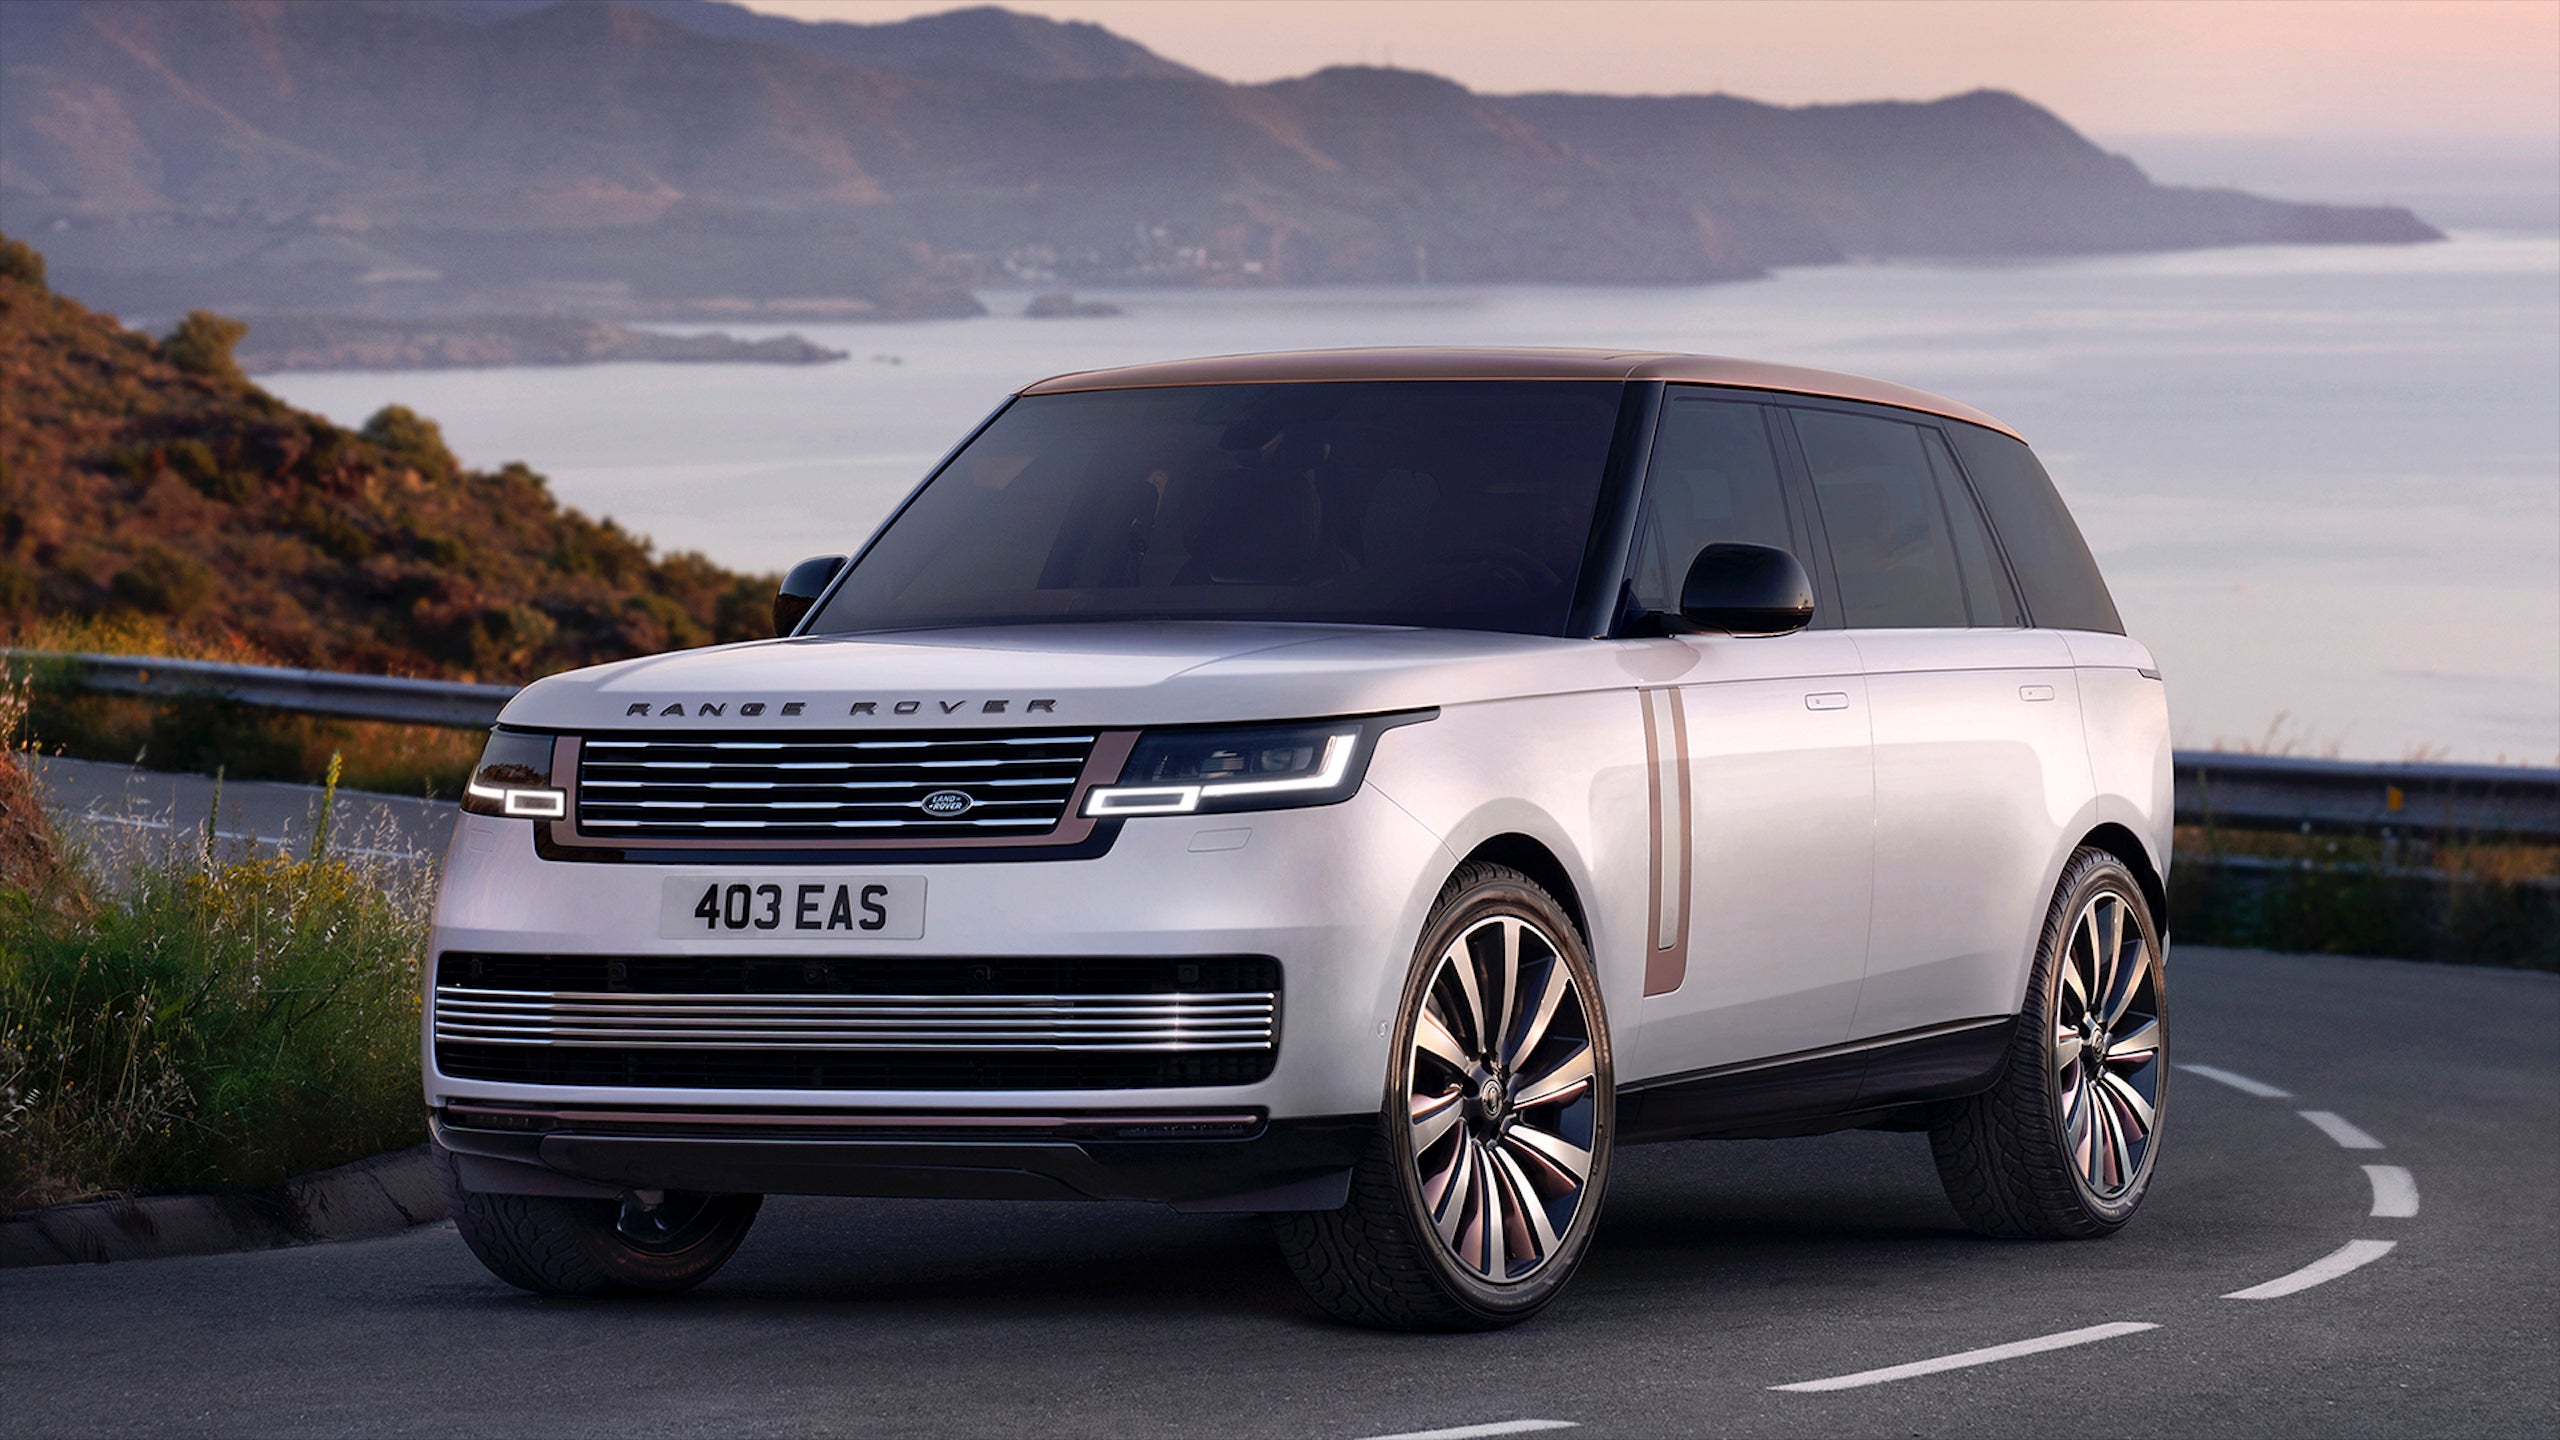 Check Out the 2023 Range Rover SV's Awesome Interior Wood Mosaic